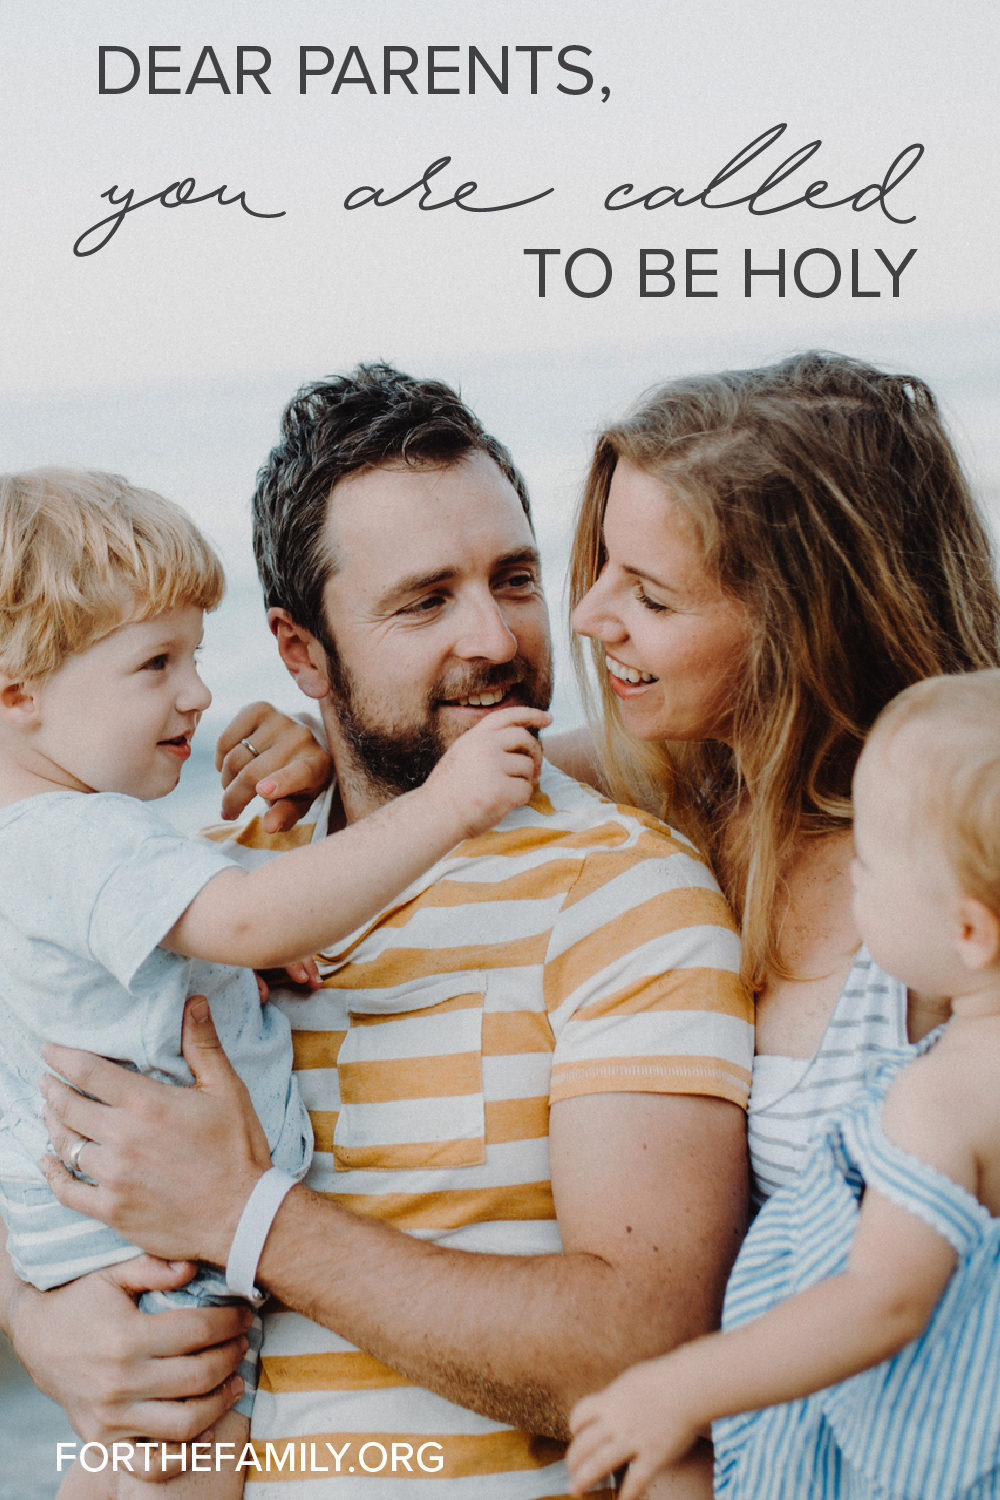 Being a parent is exhausting. And remaining calm and Christlike in the midst of our children’s meltdowns can test our character like nothing else. Find encouragement for walking through trying times with us today!